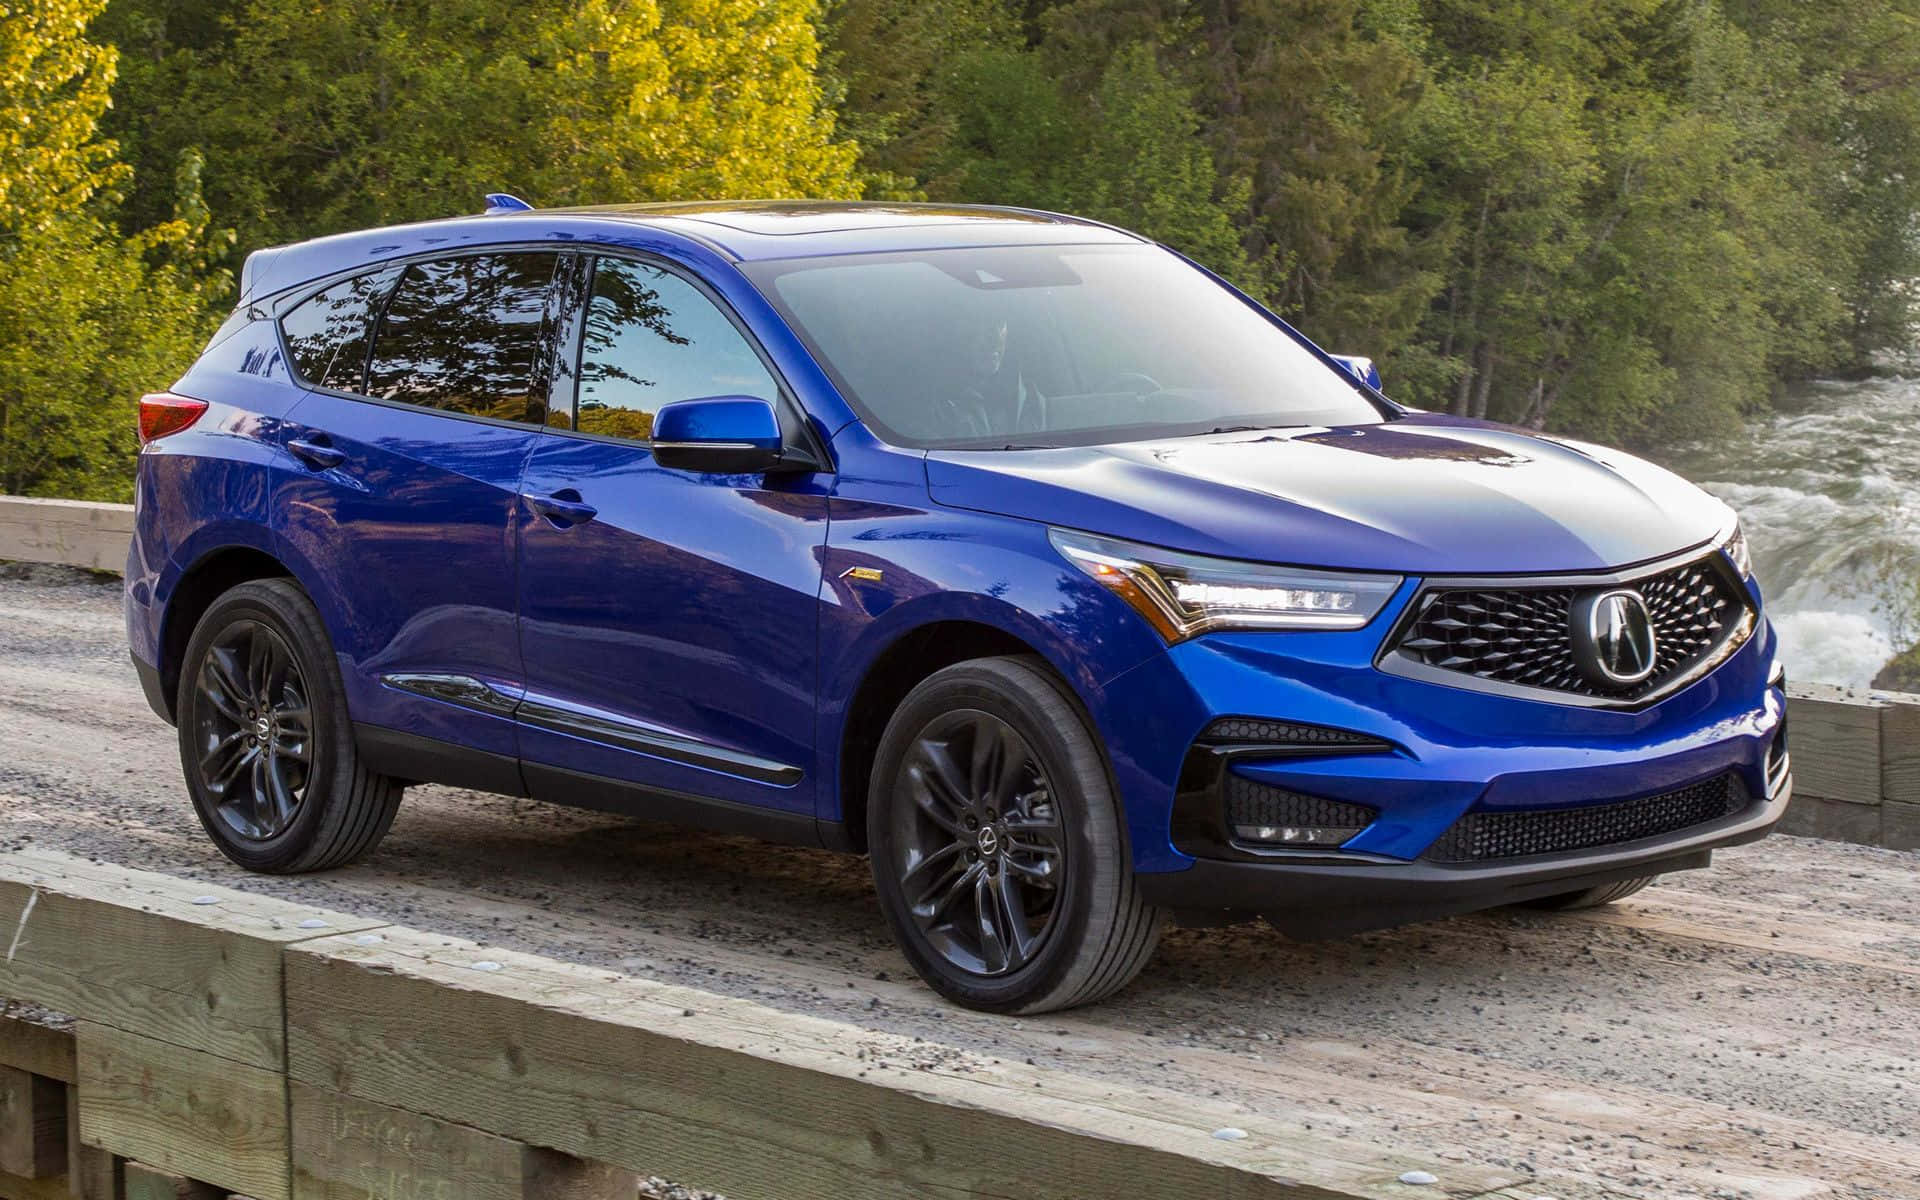 A Stunning Acura RDX in a Scenic Outdoor Setting Wallpaper